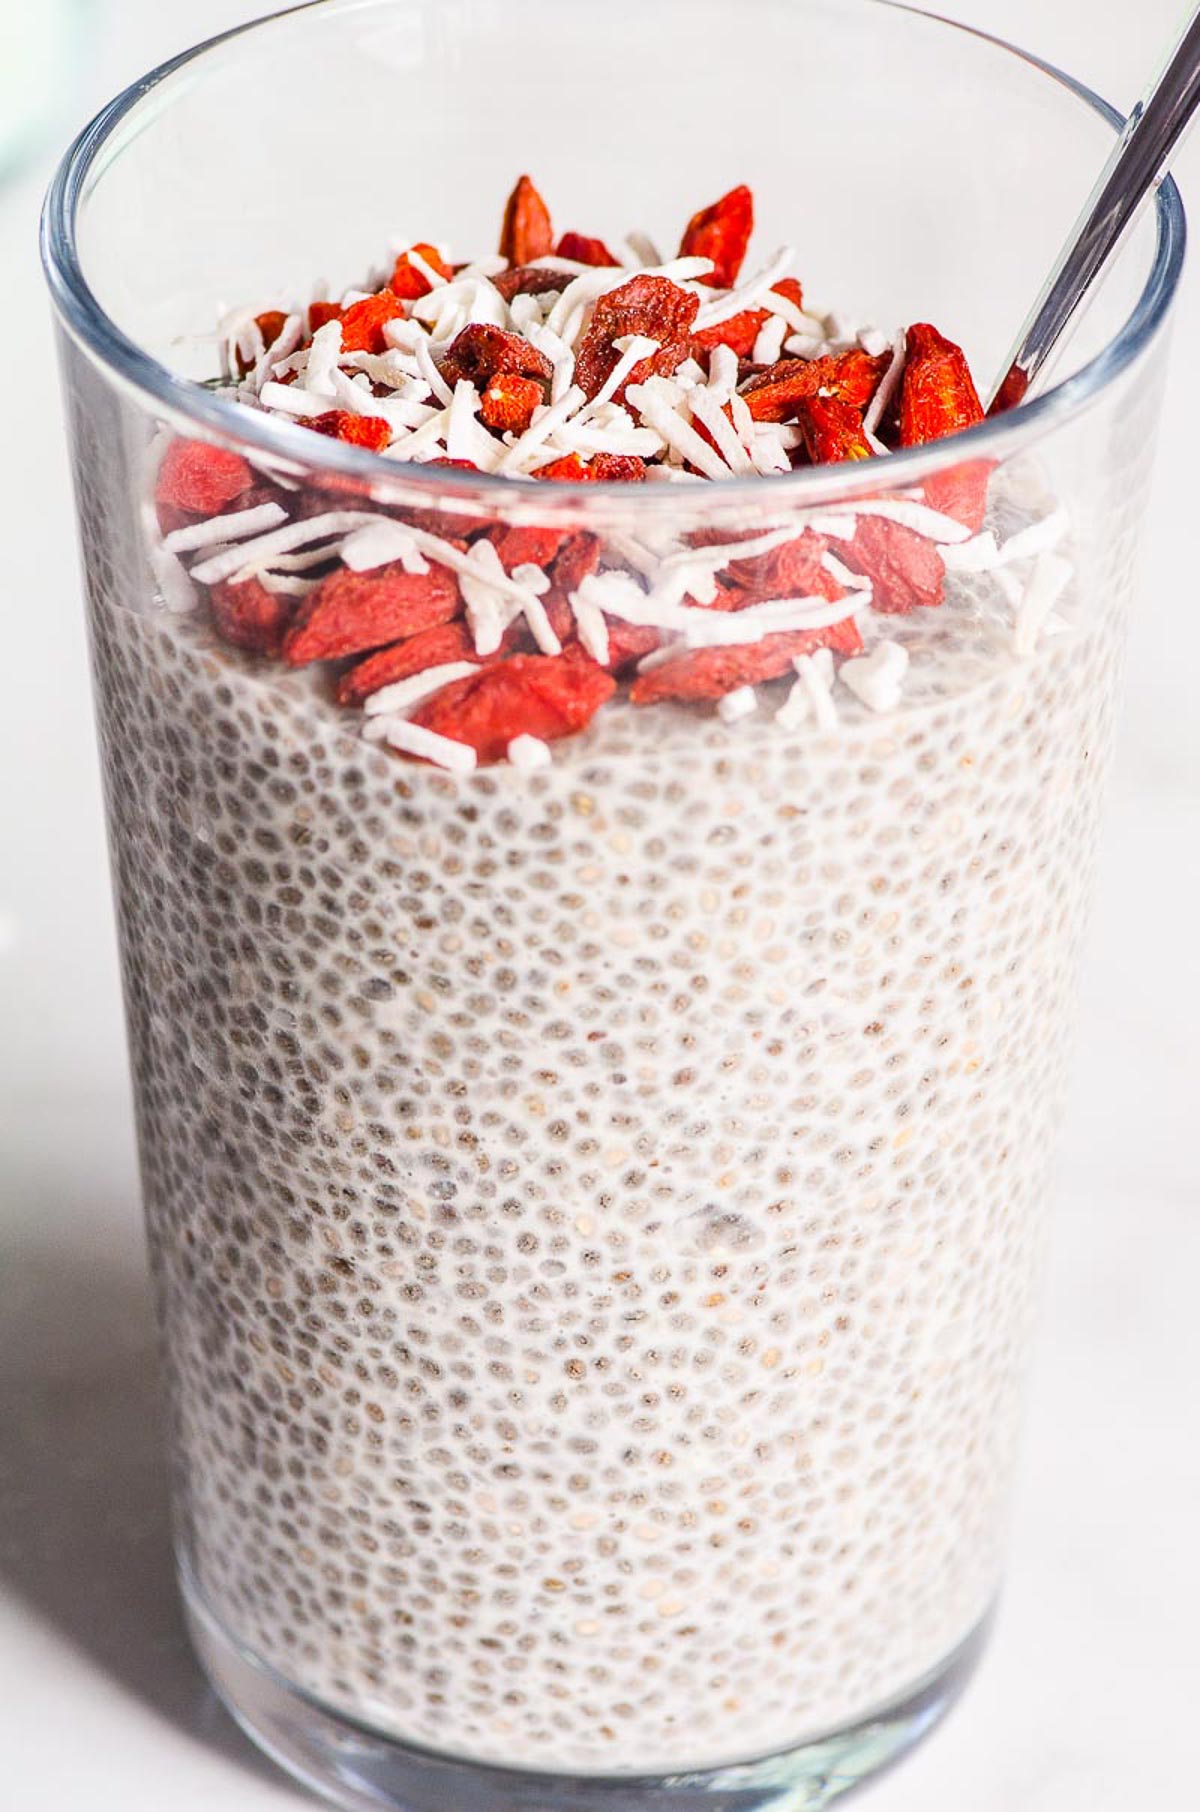 Overnight chia pudding in glass with chocolate chips, goji berries and coconut flakes.